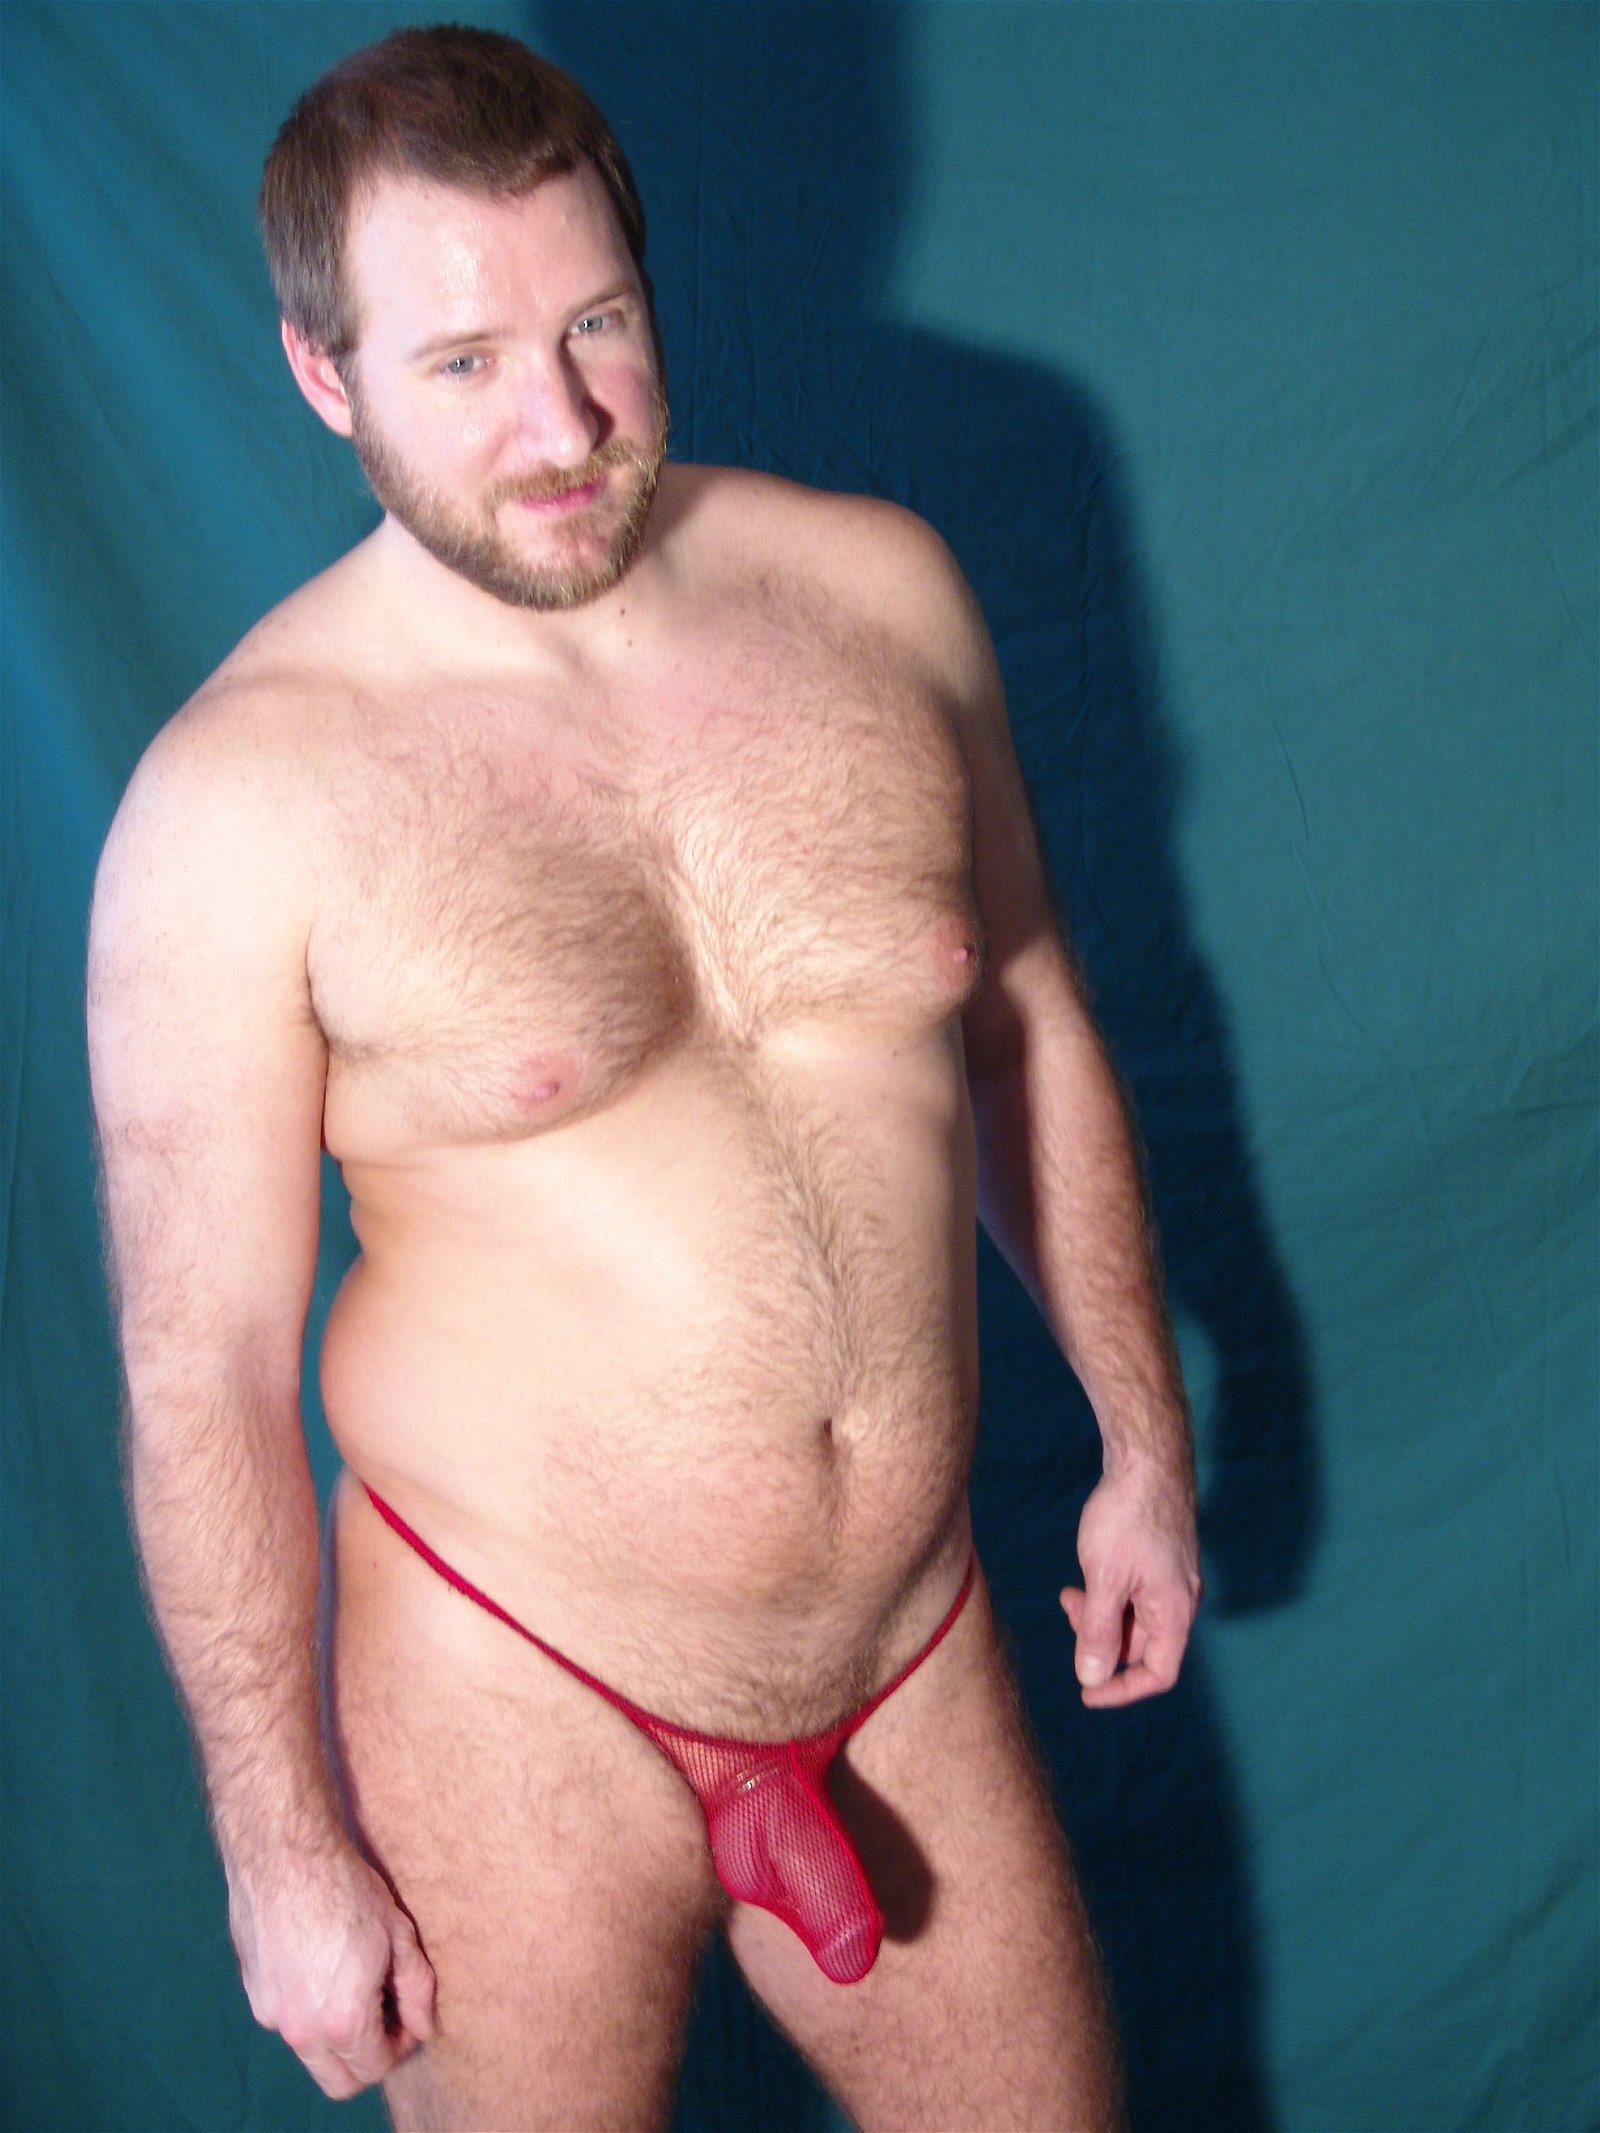 Photo by Hairy Musclebears with the username @hairymusclebears,  September 5, 2019 at 4:28 PM and the text says 'California Gay Musclebear Daddy from USAFUR.com personals #hotdaddy #hotmature #hairybear #hairychest #hairygay #hairyman #hairybody #sexypose #gaydaddy #gaymaturemen #blueeyedgay #290lbs #hairychest #burlymale #bullneck #beefybear #beefymale #slavicman..'